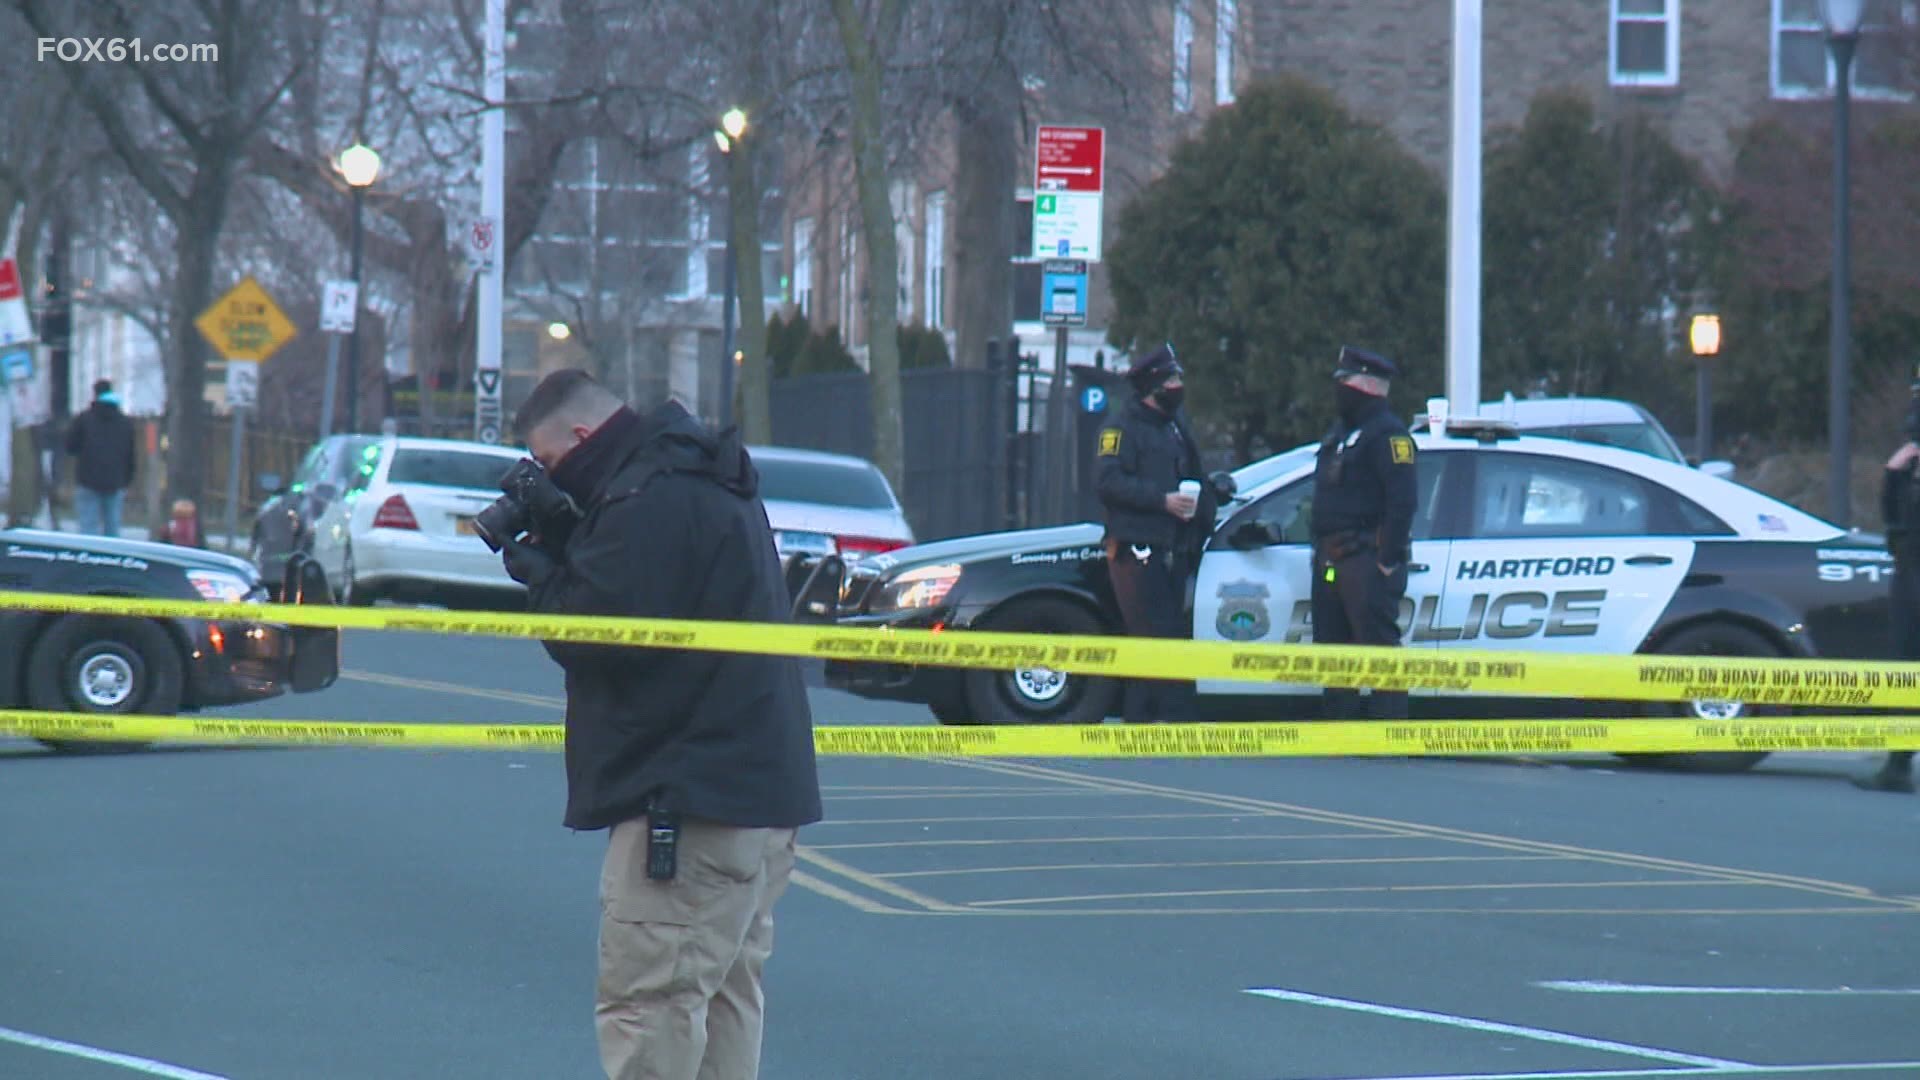 Since Tuesday, Hartford police are investigating six shootings.